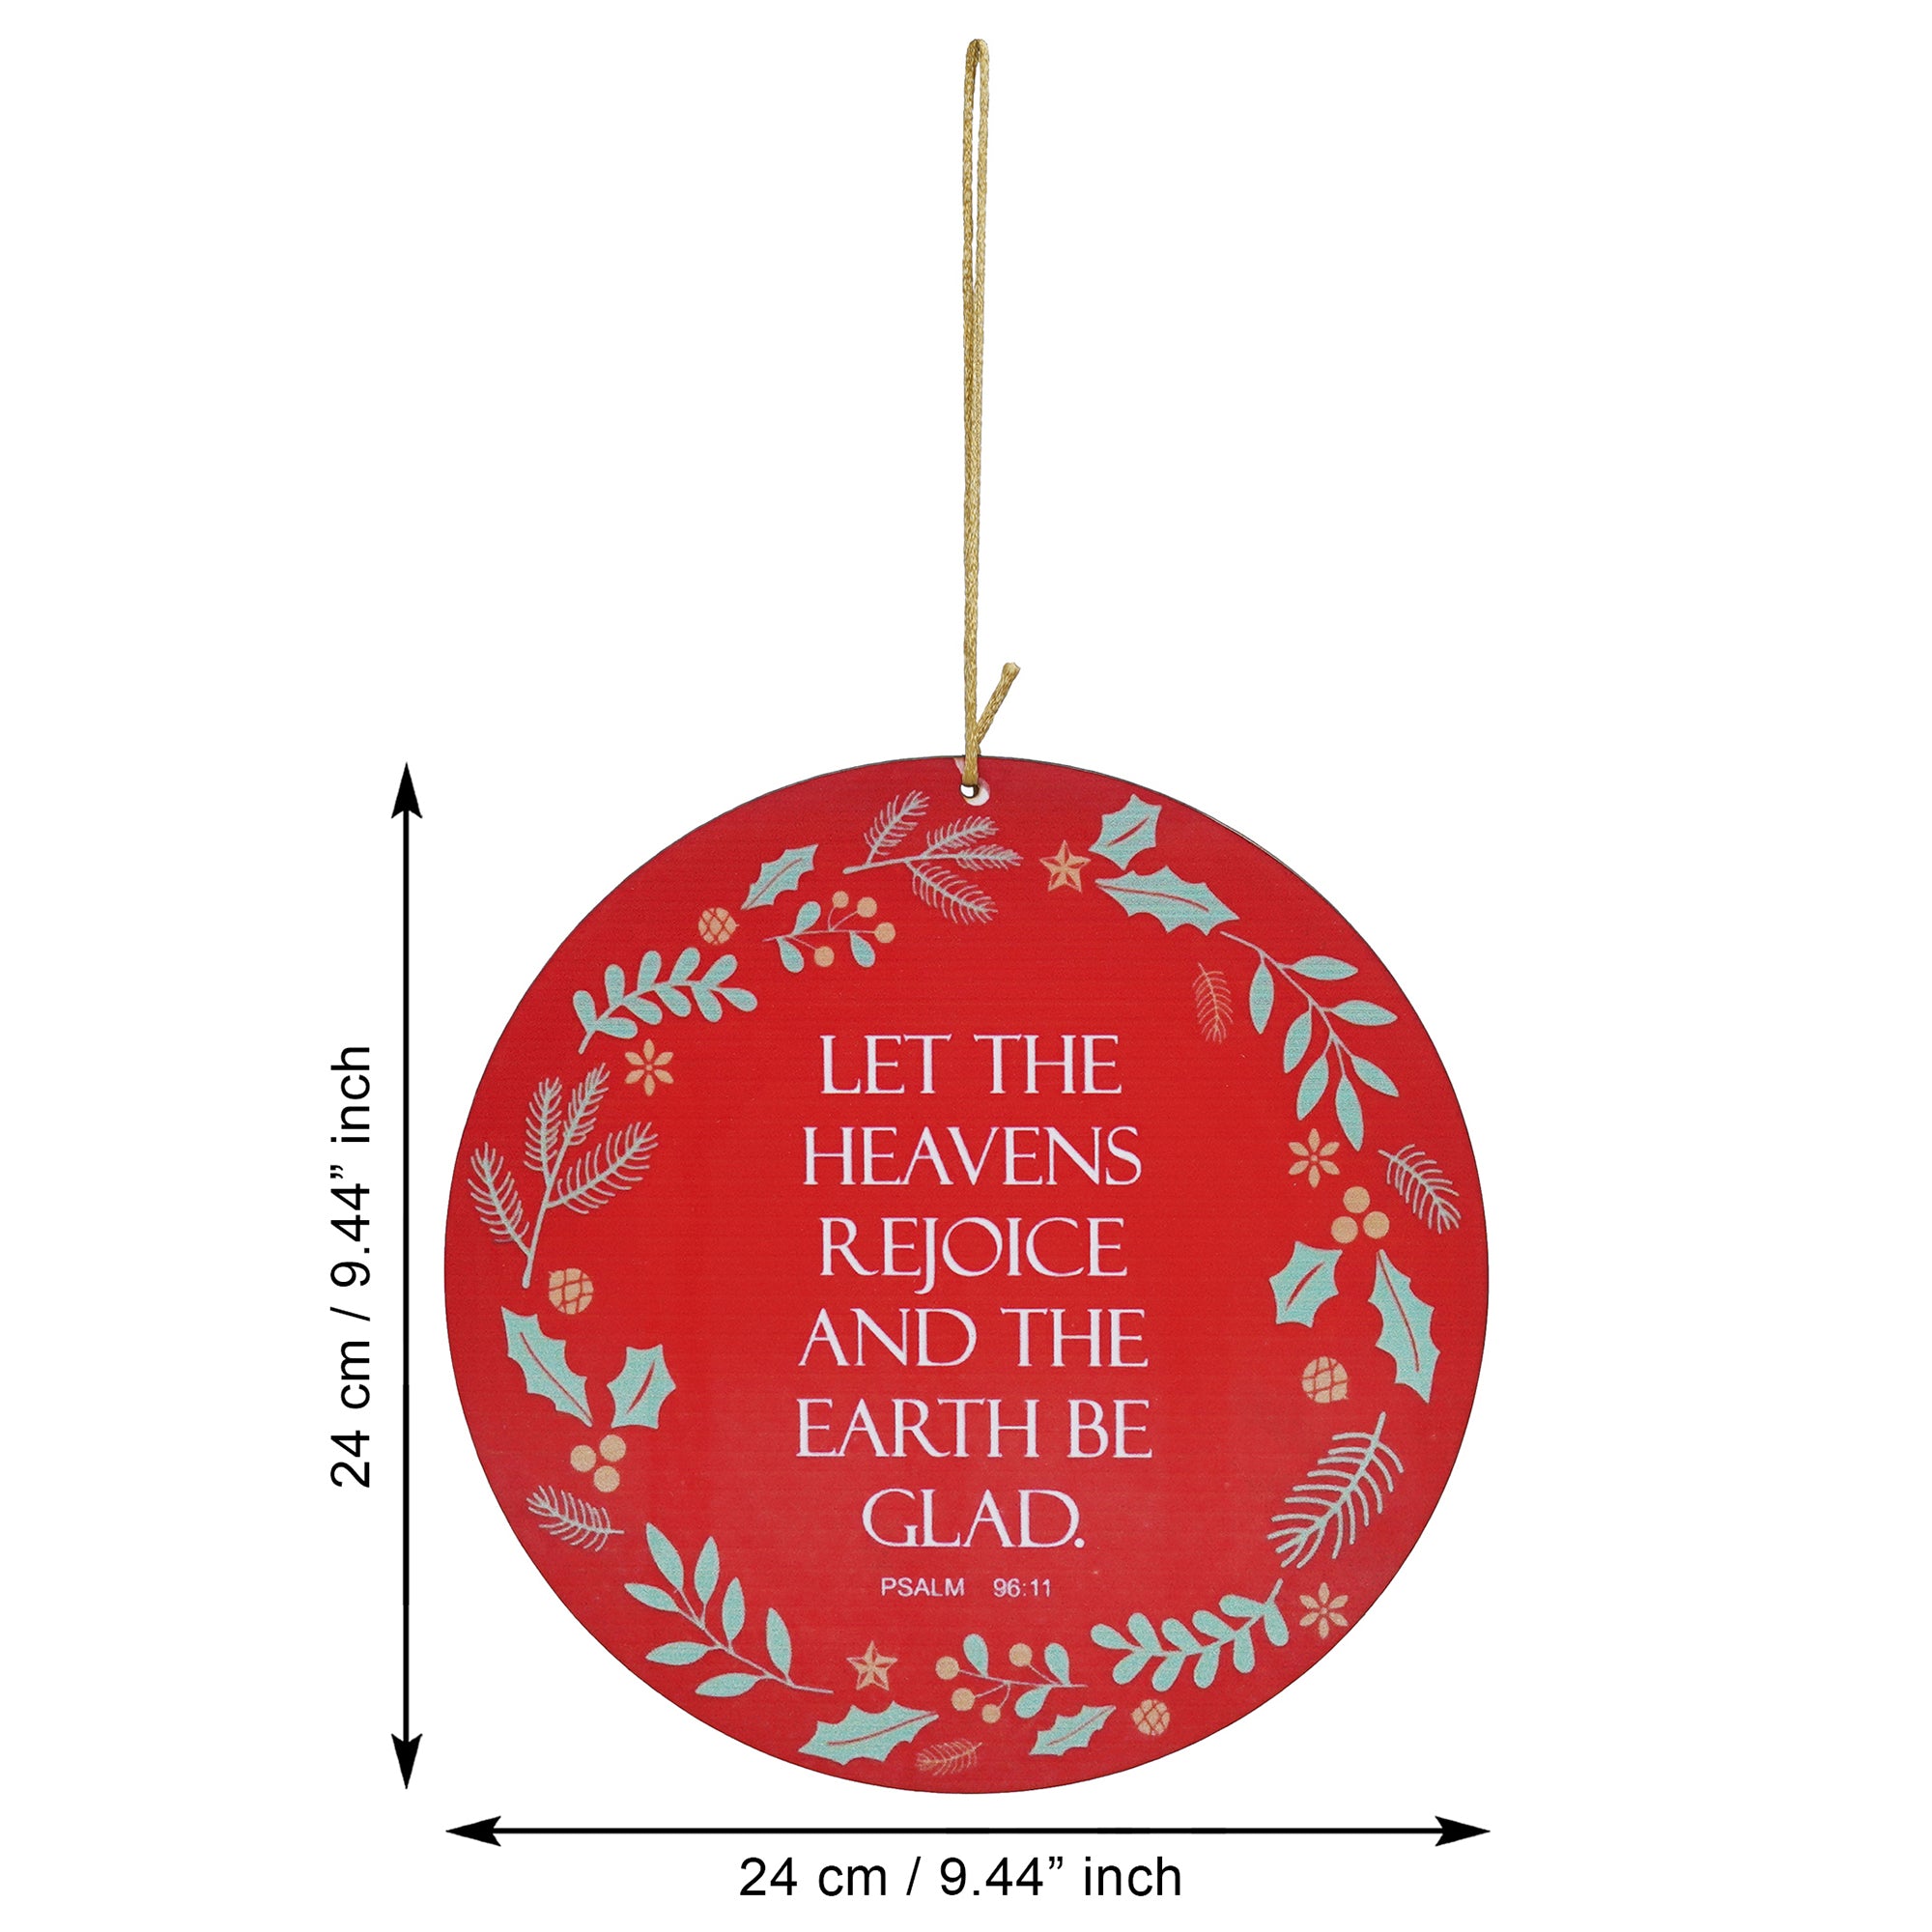 eCraftIndia "LET THE HEAVENS REJOICE AND THE EARTH BE GLAD. PSALM 96:11" Printed Merry Christmas Wooden Door Wall Hanging Ornaments for Home Decoration (Red, Green, White) 3